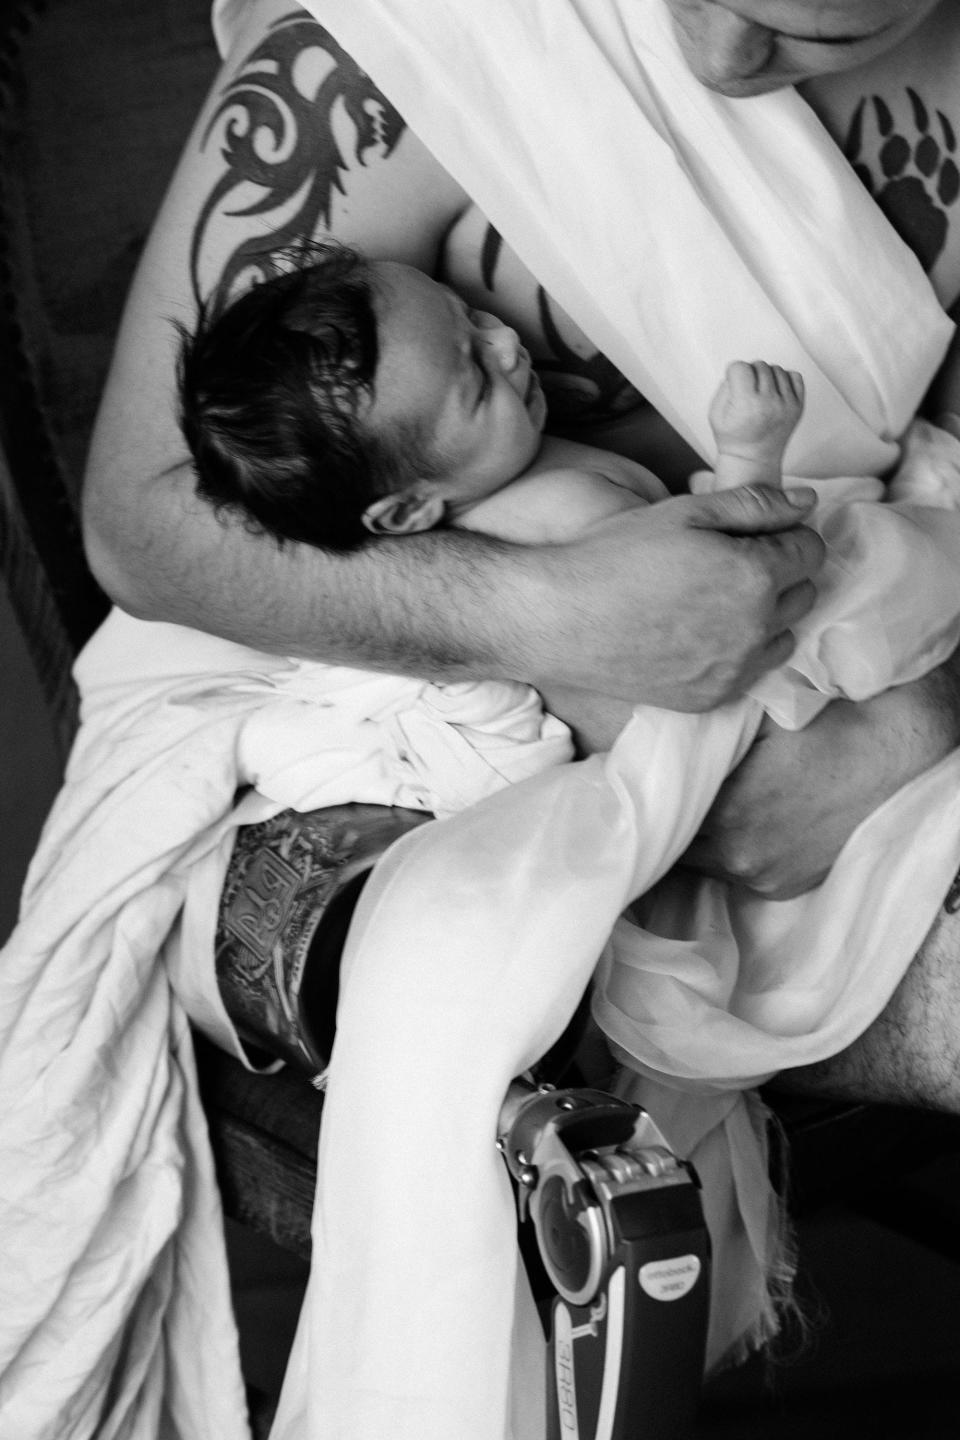 A closely-cropped black-and-white-photograph by Ukrainian photographer Marta Syrko, showing soldier Serhii and his son. Serhii is seated and unclothed except for long bands of white cloth, under which his tattoos can be seen. He looks down at his baby son in his arms. In the lower half of the picture, his prosthetic lower leg is visible.